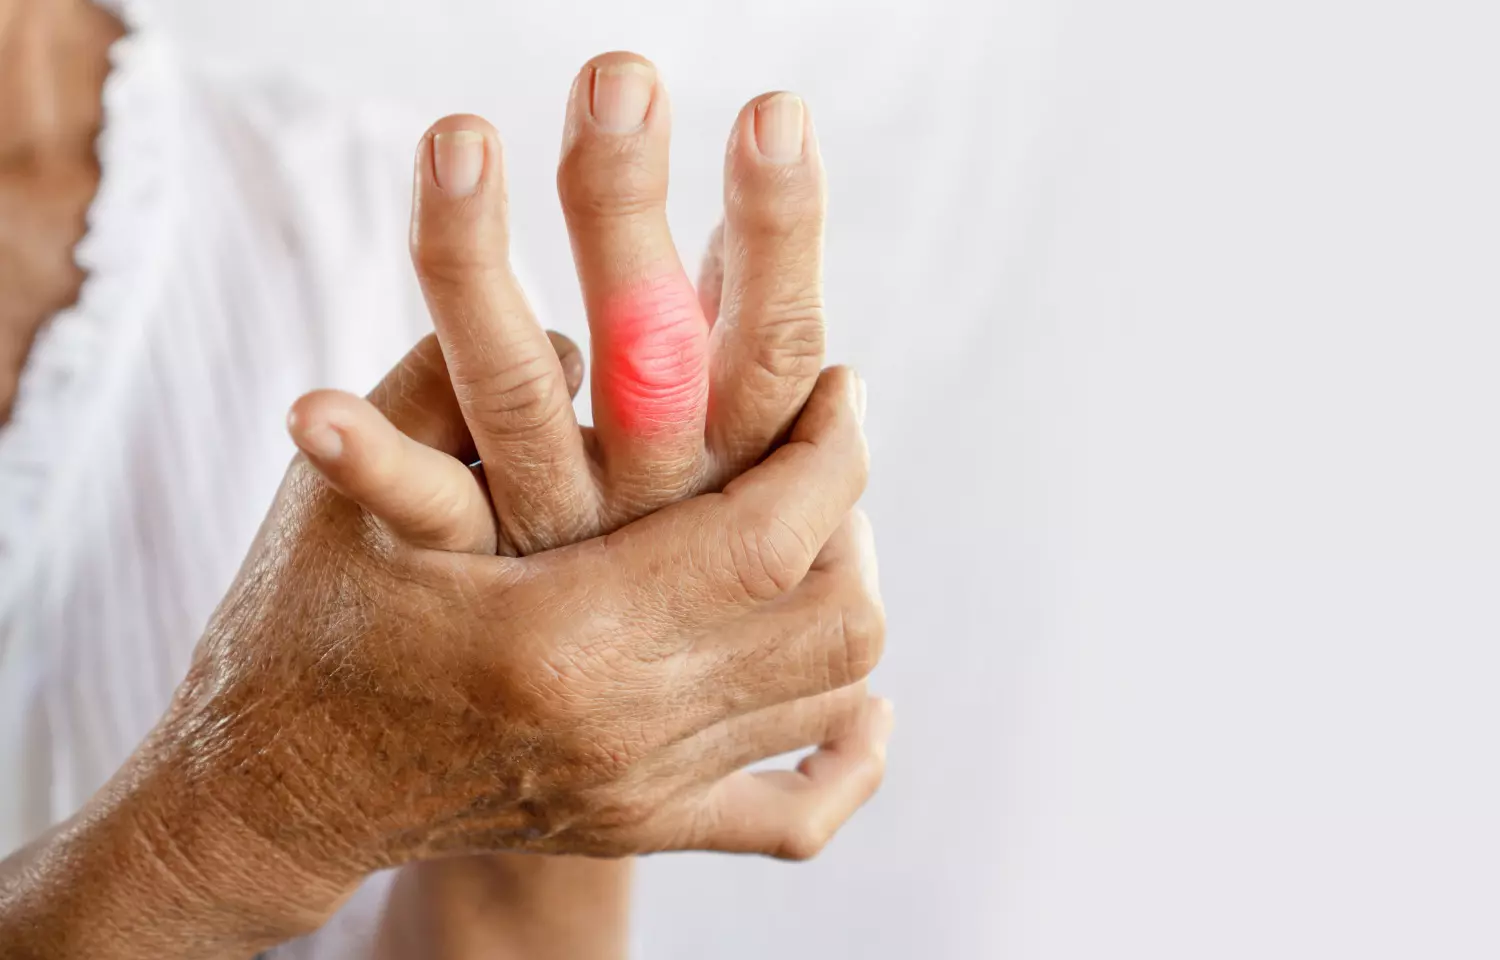 Lipofilling procedure improves pain and function in finger osteoarthritis